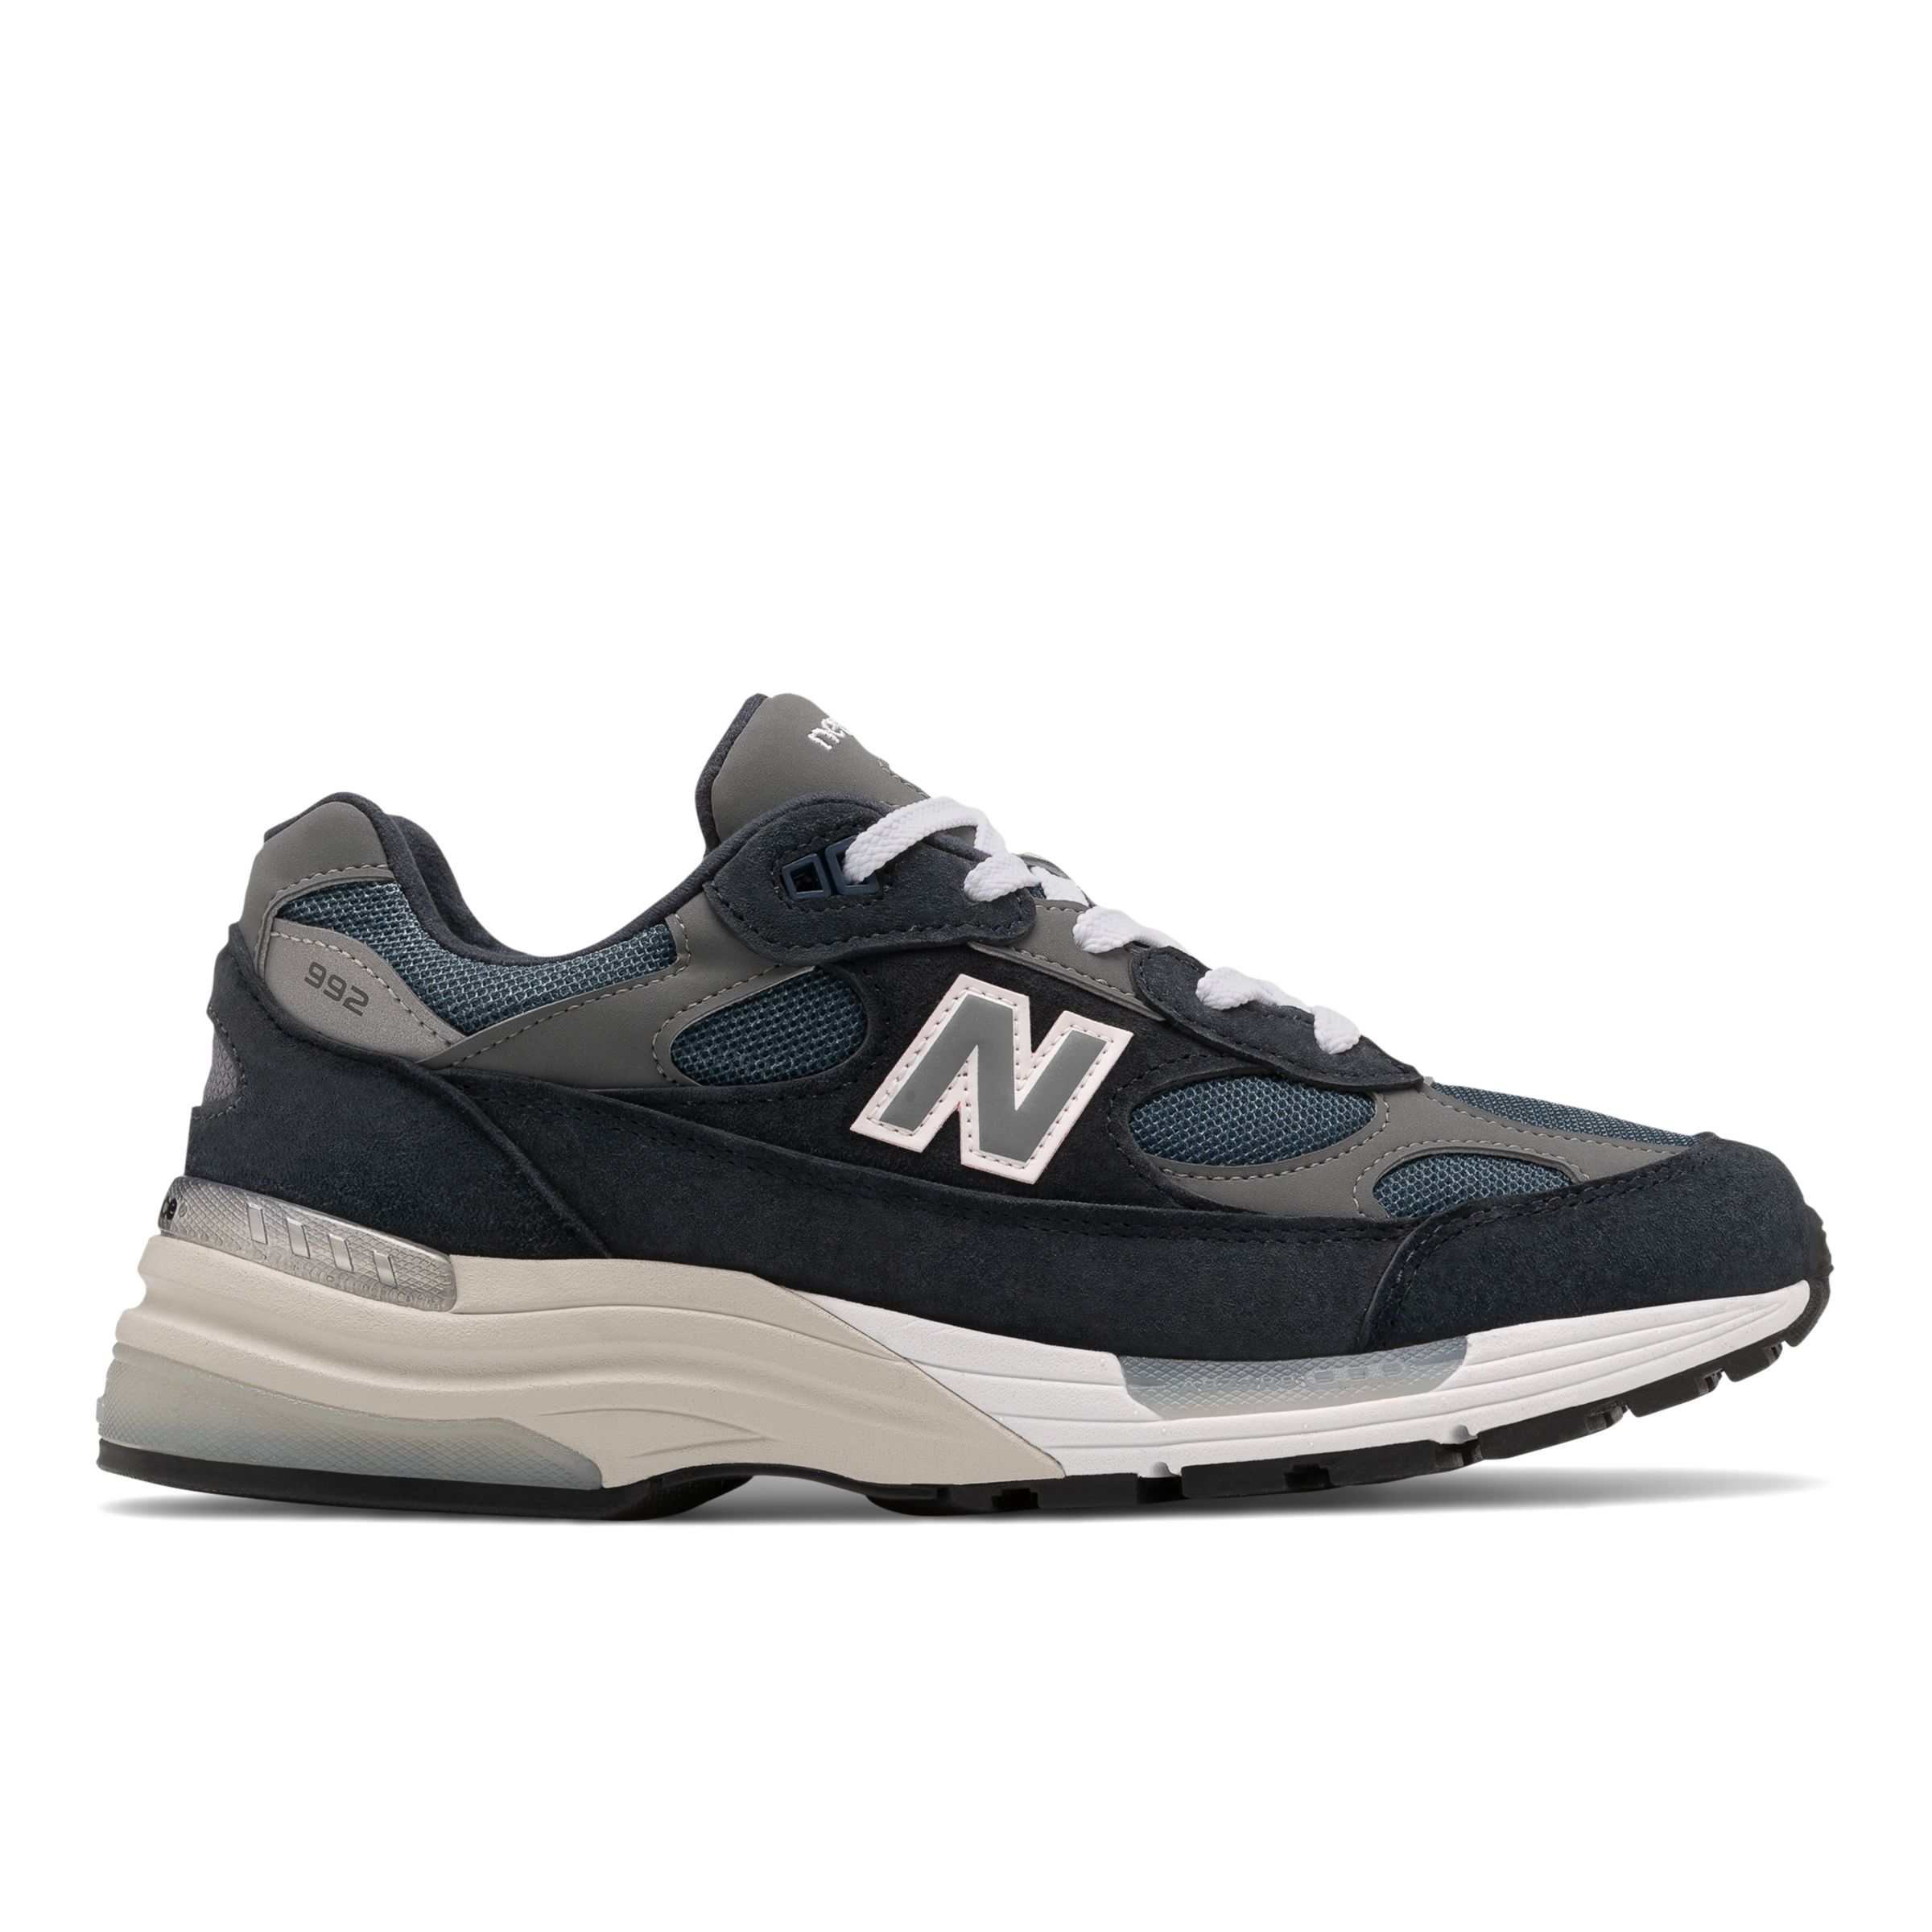 Made in US 992 - New Balance